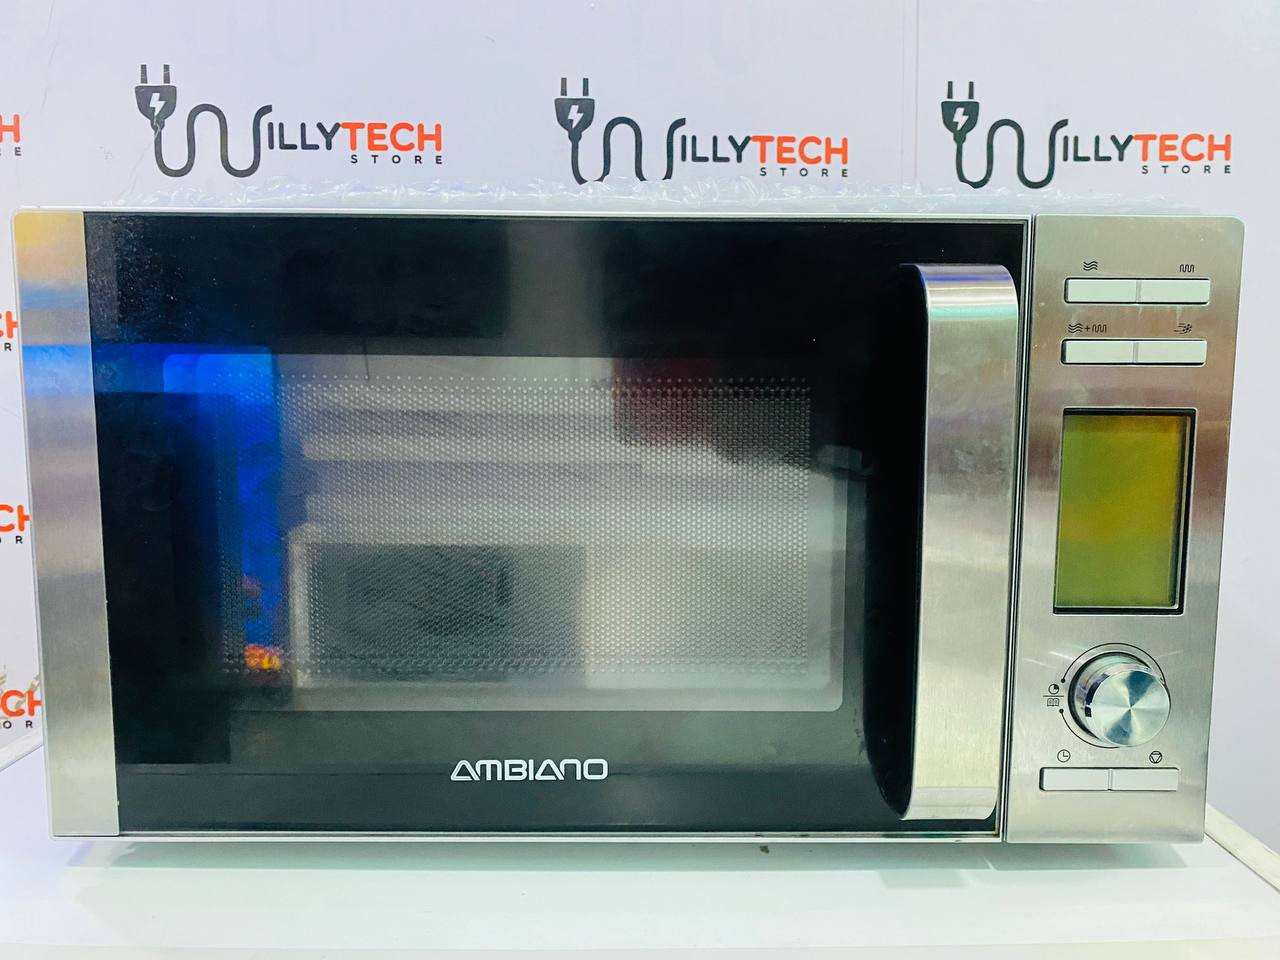 Ciatronic Microwave +Grill